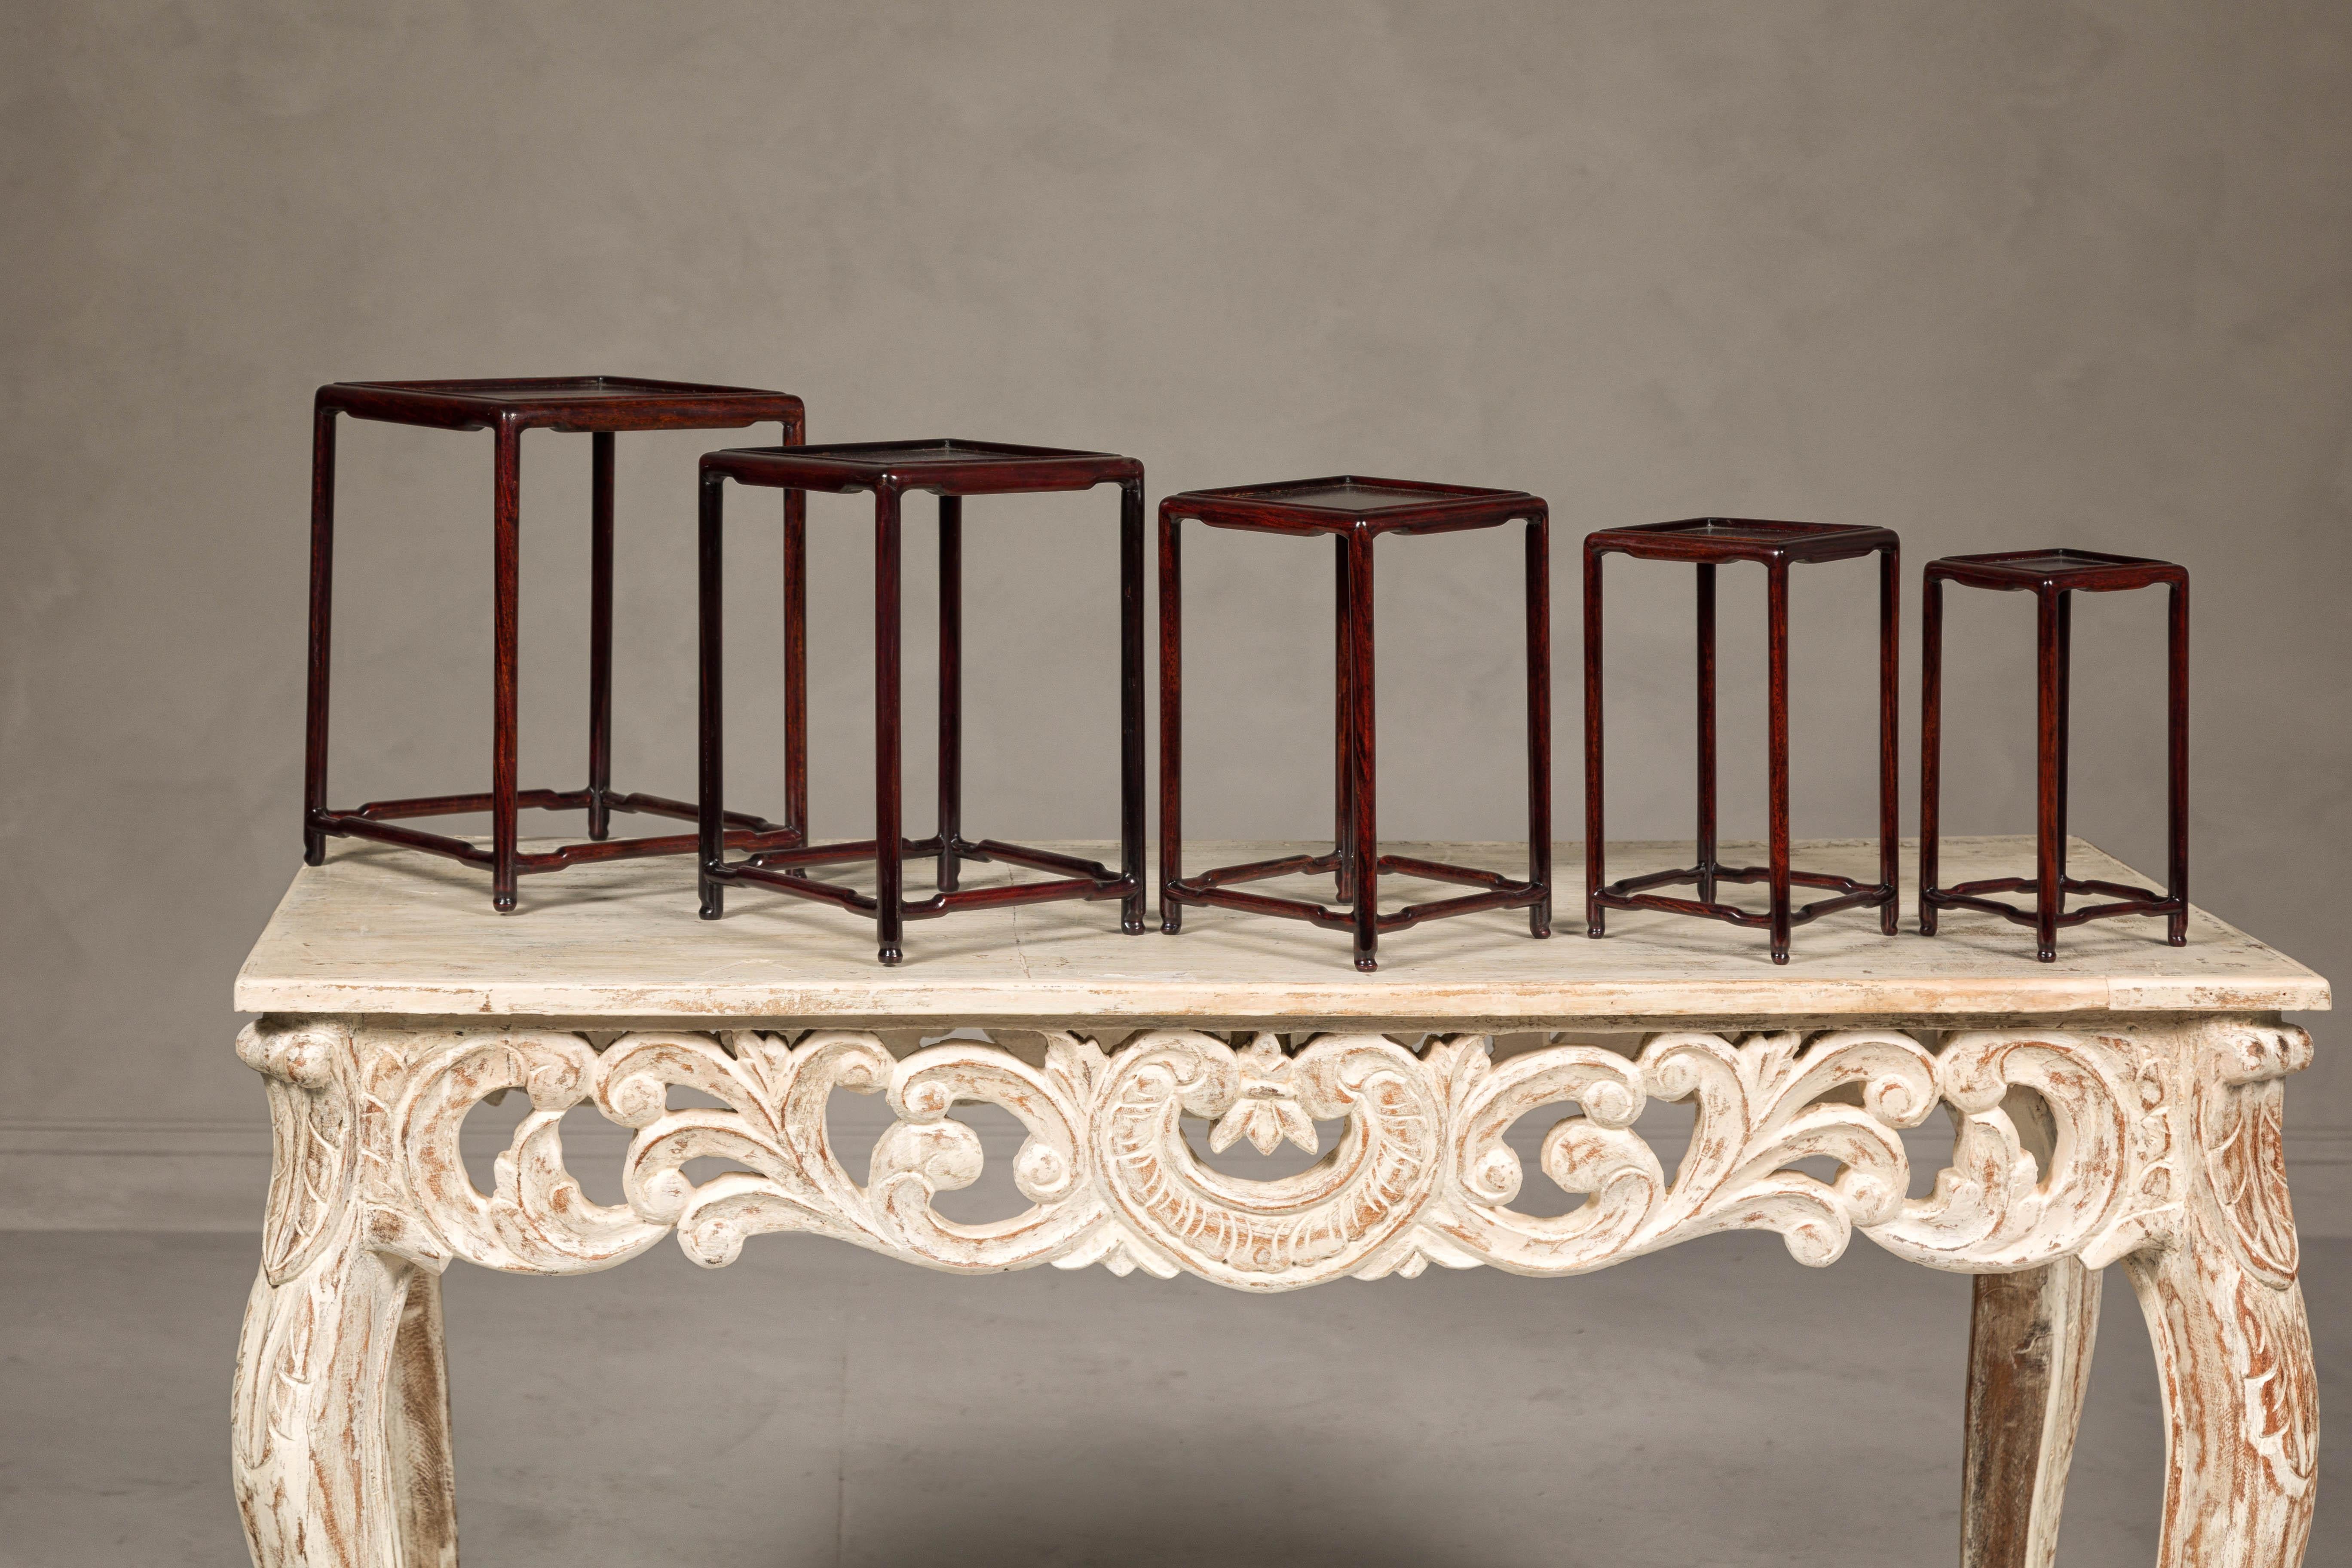 A set of five small size rosewood nesting tables with square inset tops, low humpback stretchers and reddish brown color. This set of five rosewood nesting tables from the mid-20th century exudes timeless elegance and sophisticated craftsmanship.